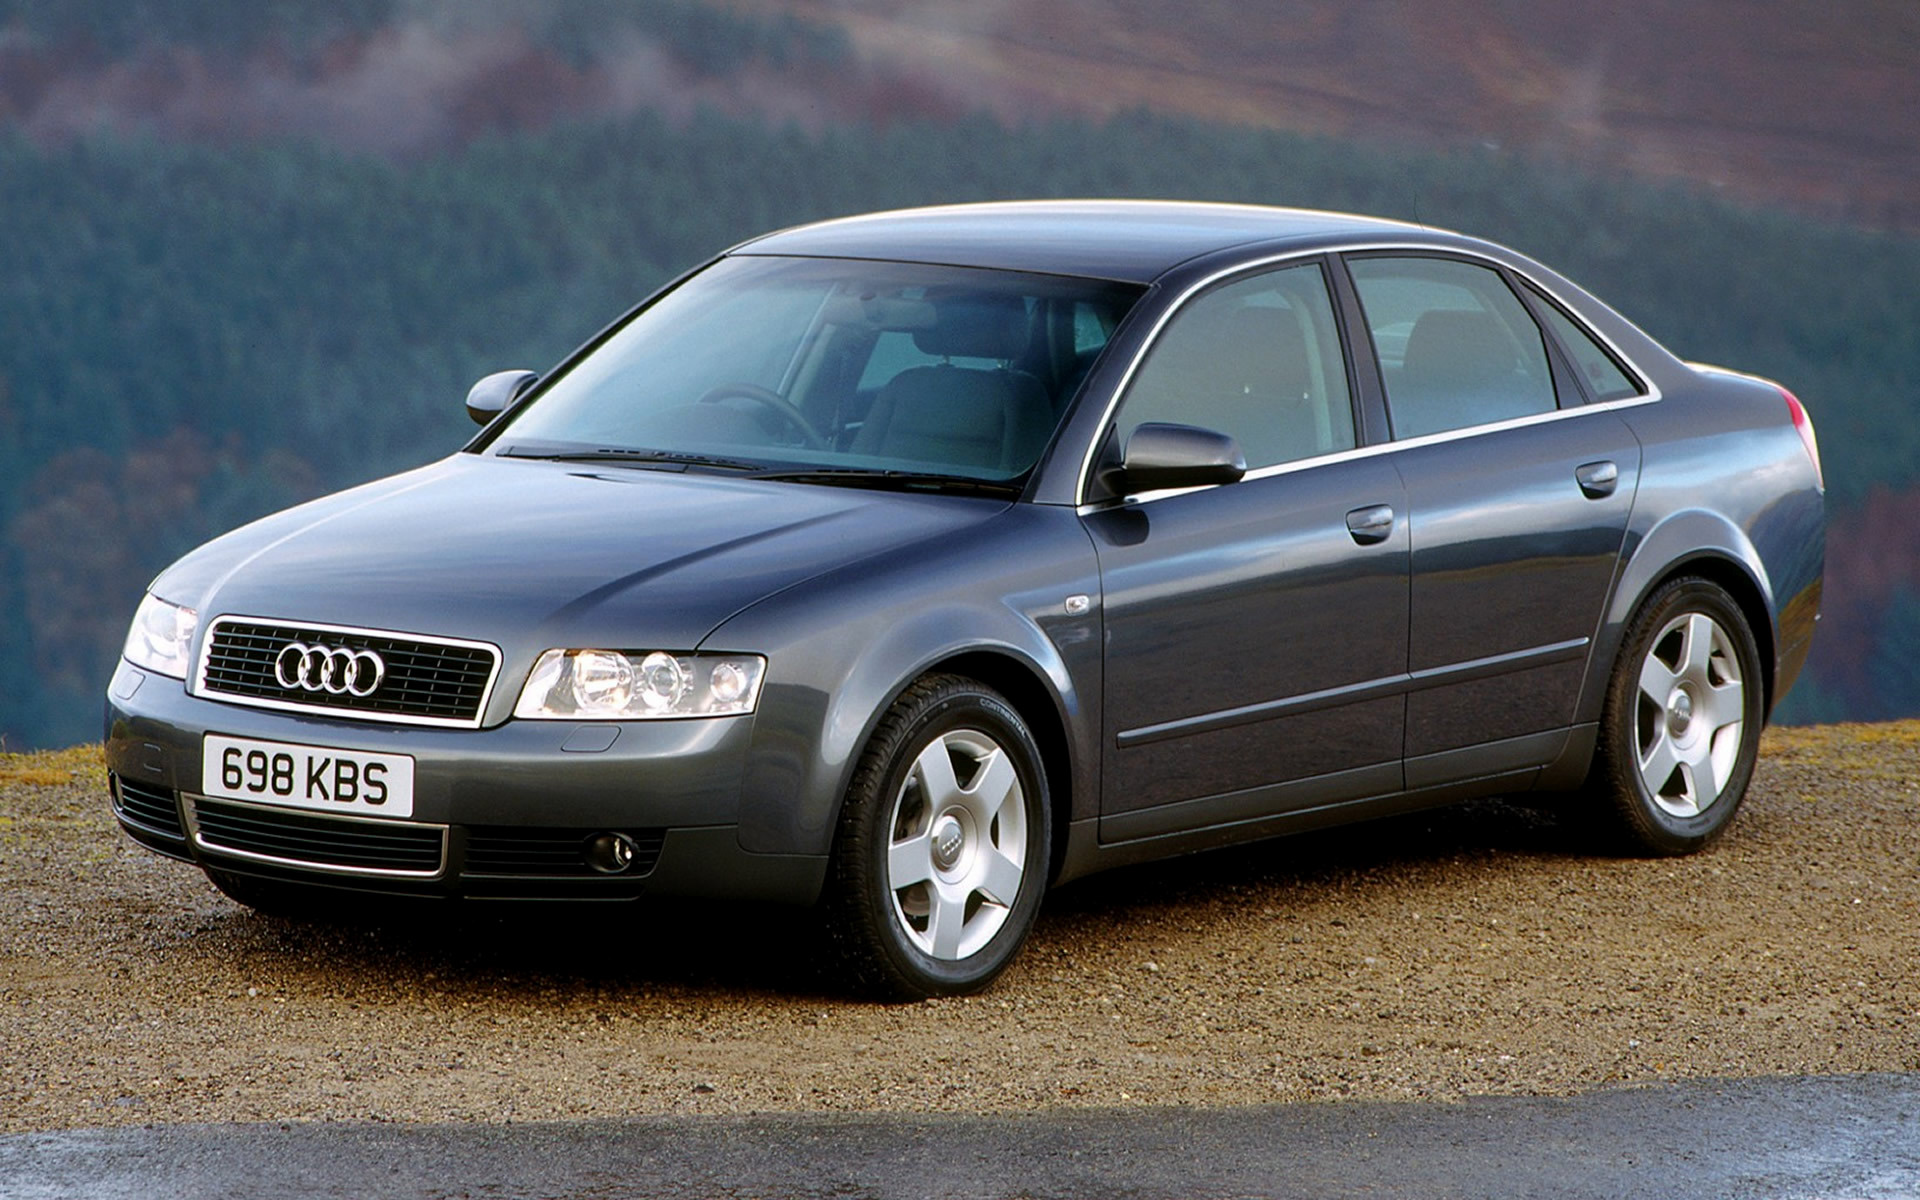 2000 Audi A4 Saloon (UK) - Wallpapers and HD Images | Car Pixel